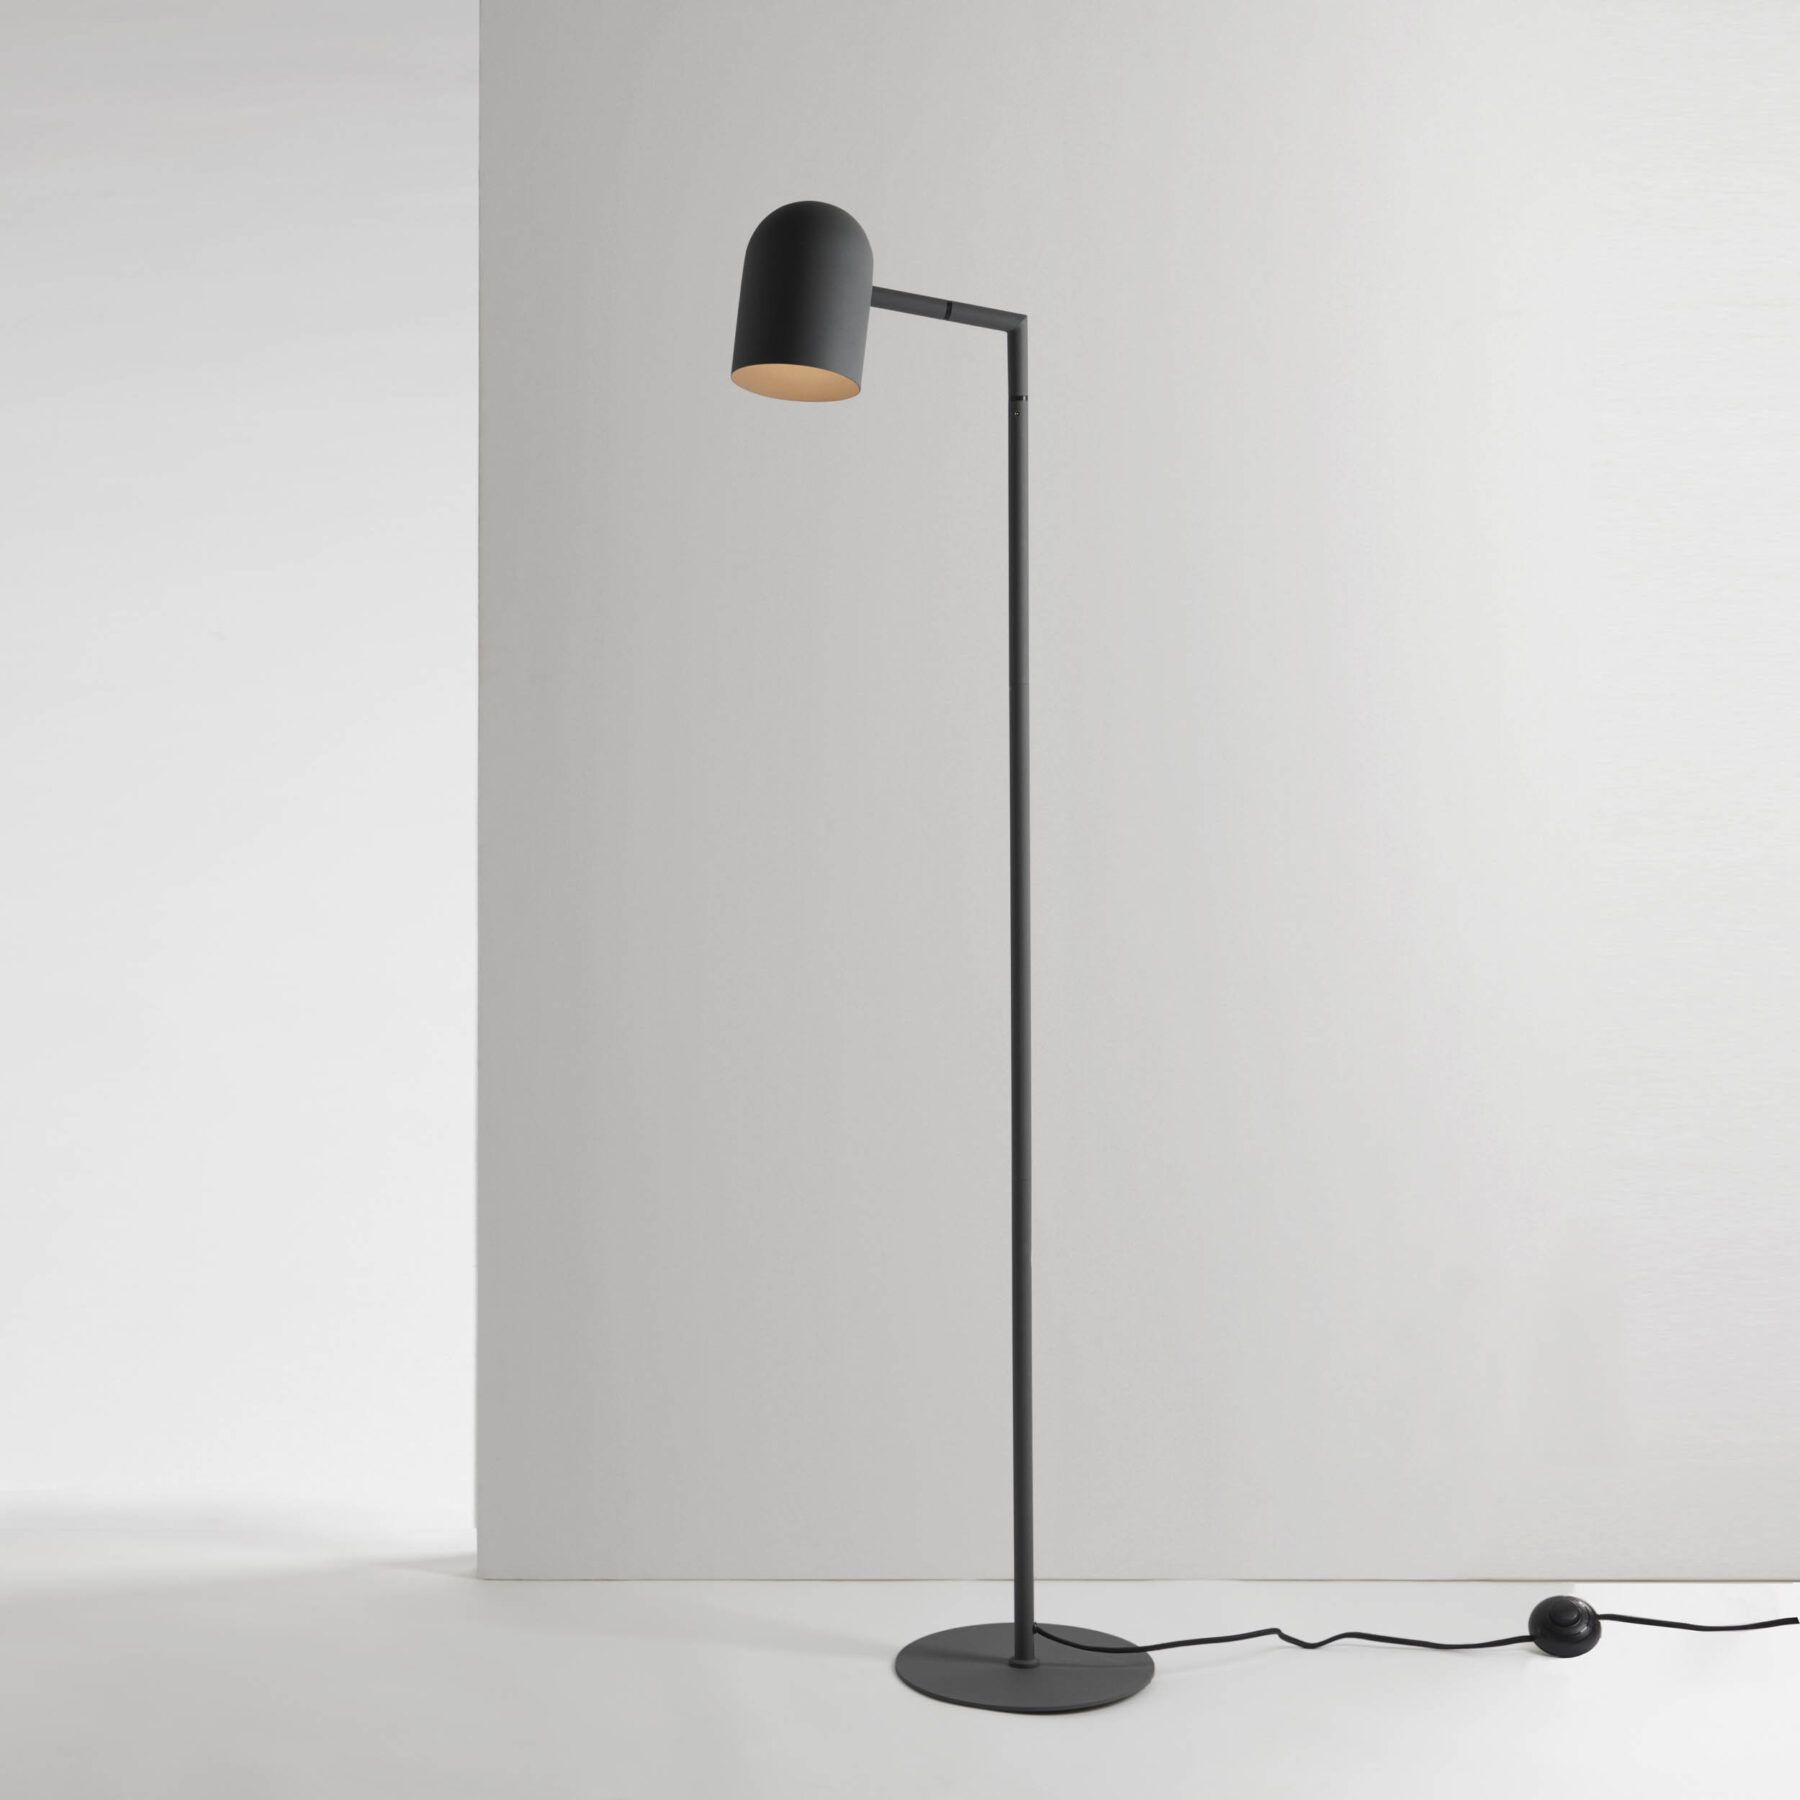 Pia Charcoal Grey Floor | Mayfield Lighting For Charcoal Grey Floor Lamps (View 7 of 15)